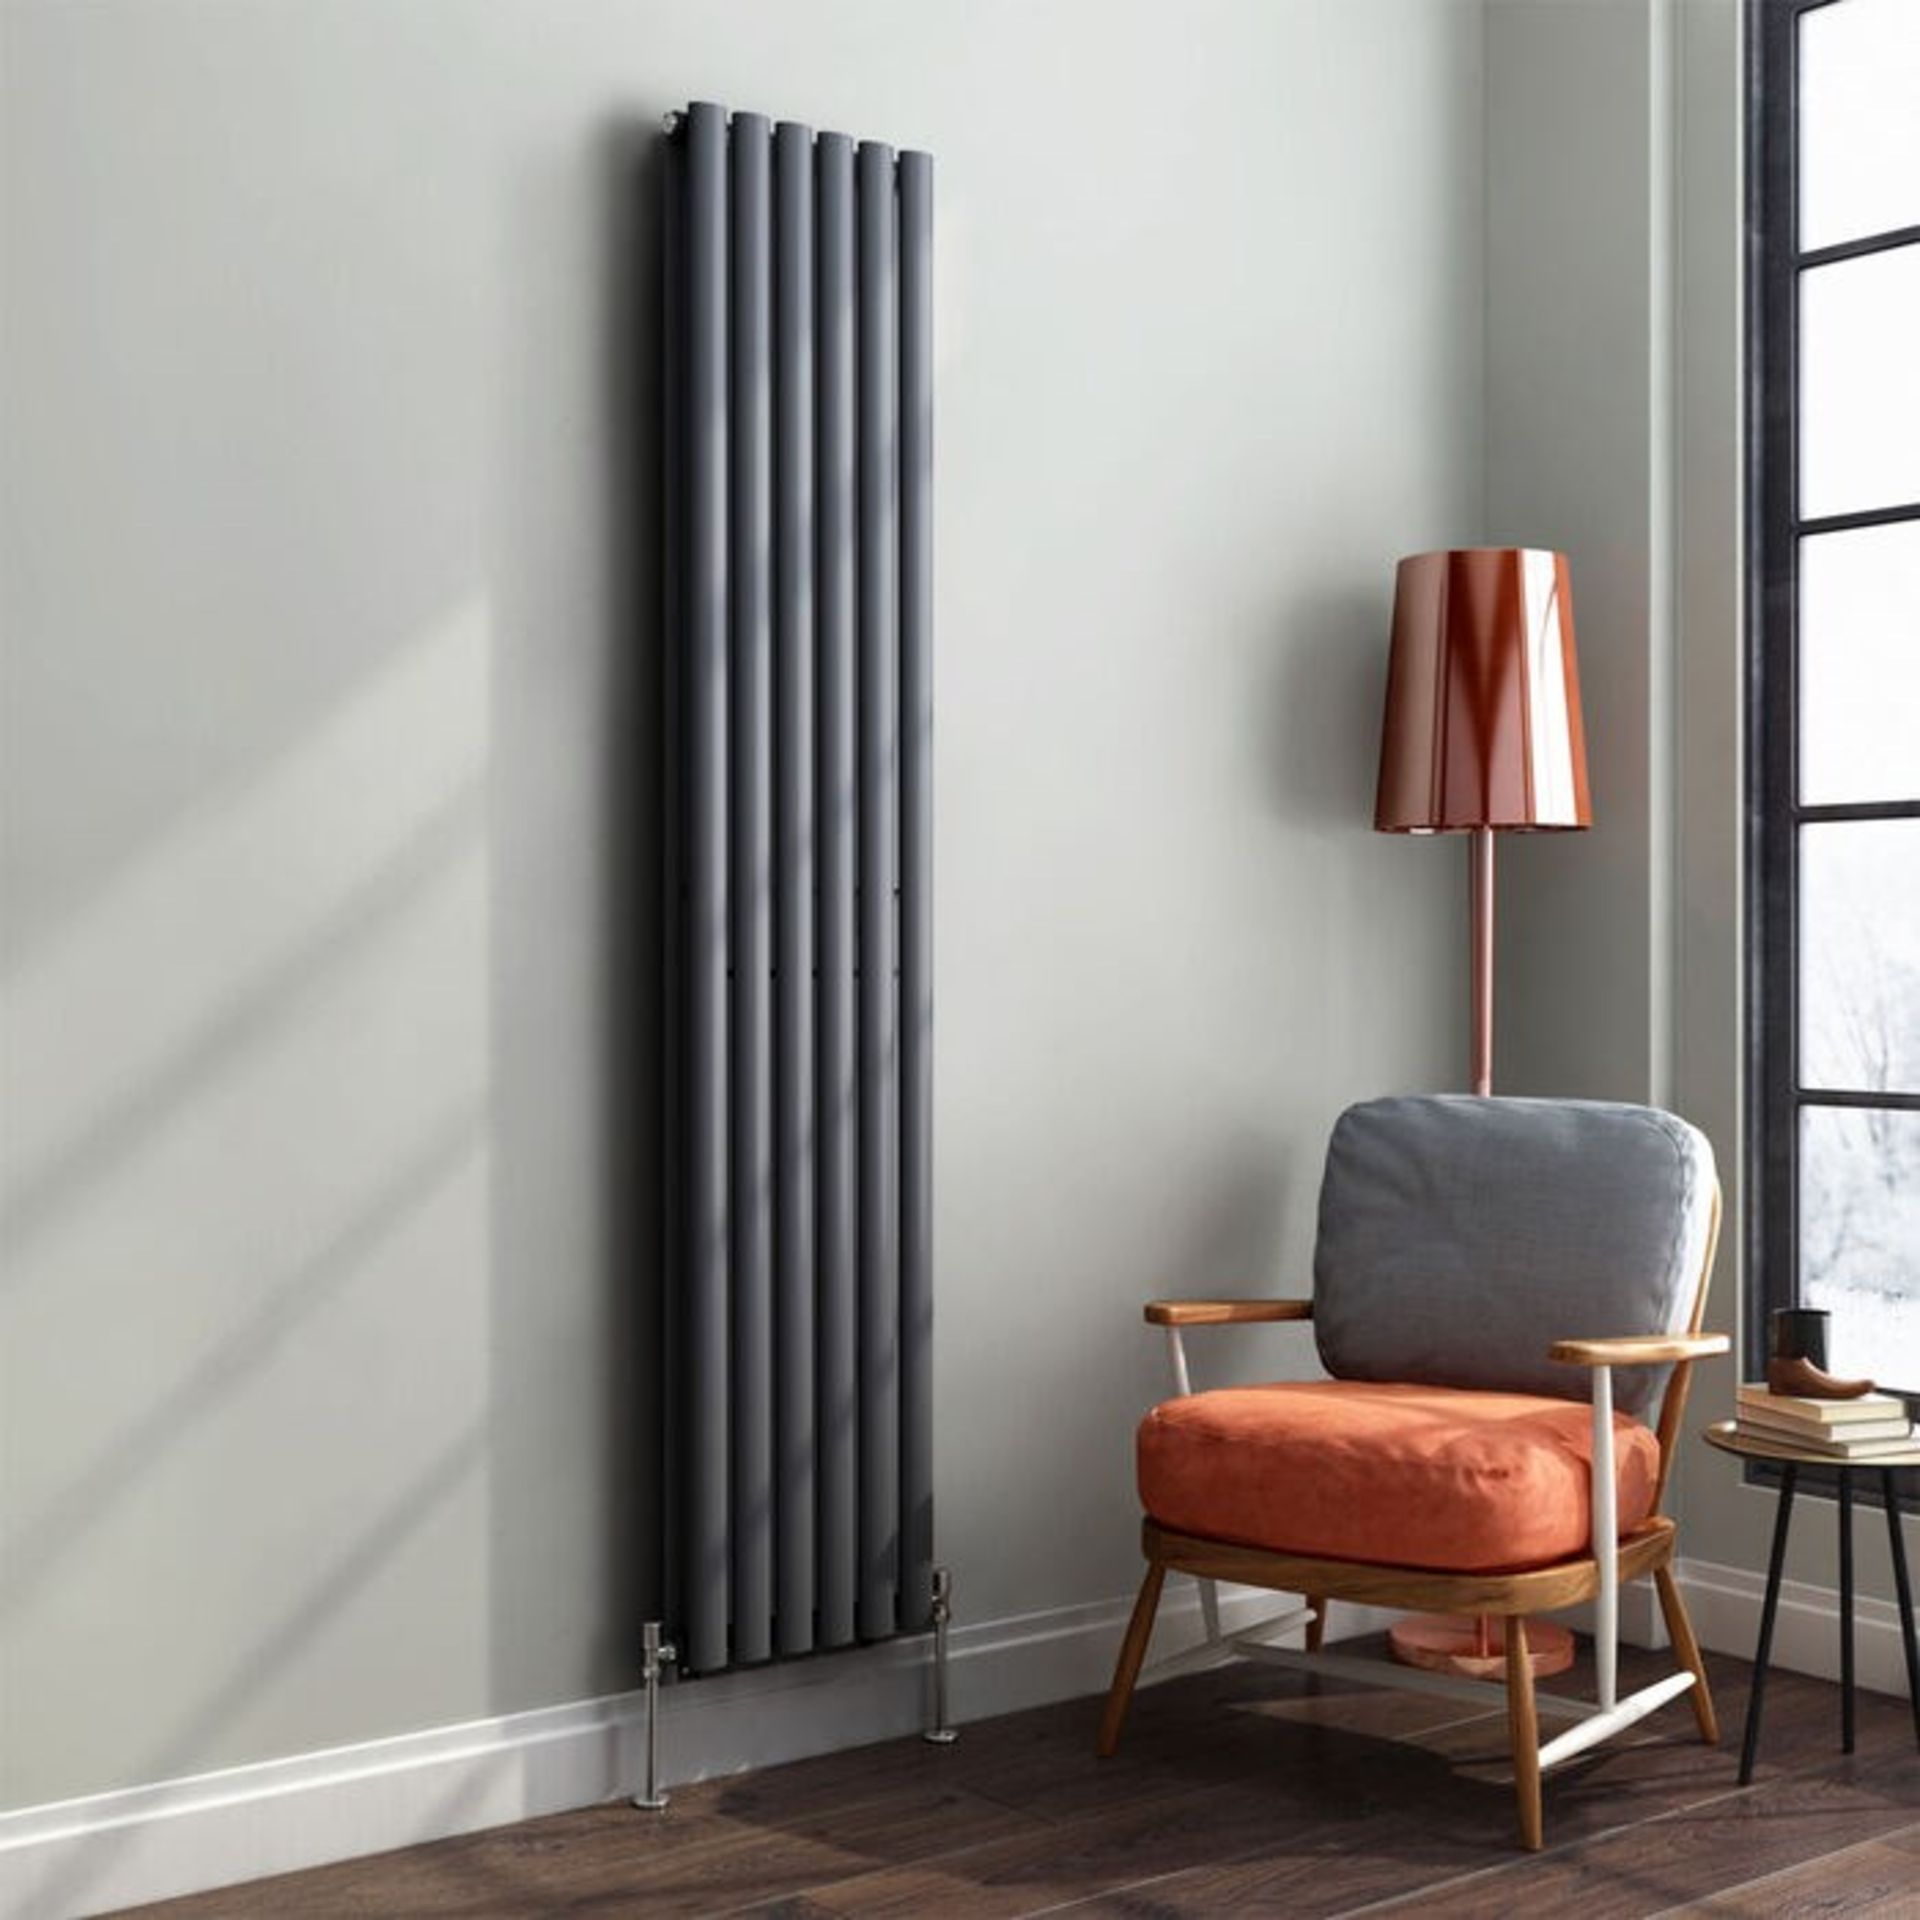 New & Boxed 1800x360mm Anthracite Double Oval Tube Vertical Radiator. Rrp £469.99.Sah6/1800Da. - Image 2 of 2